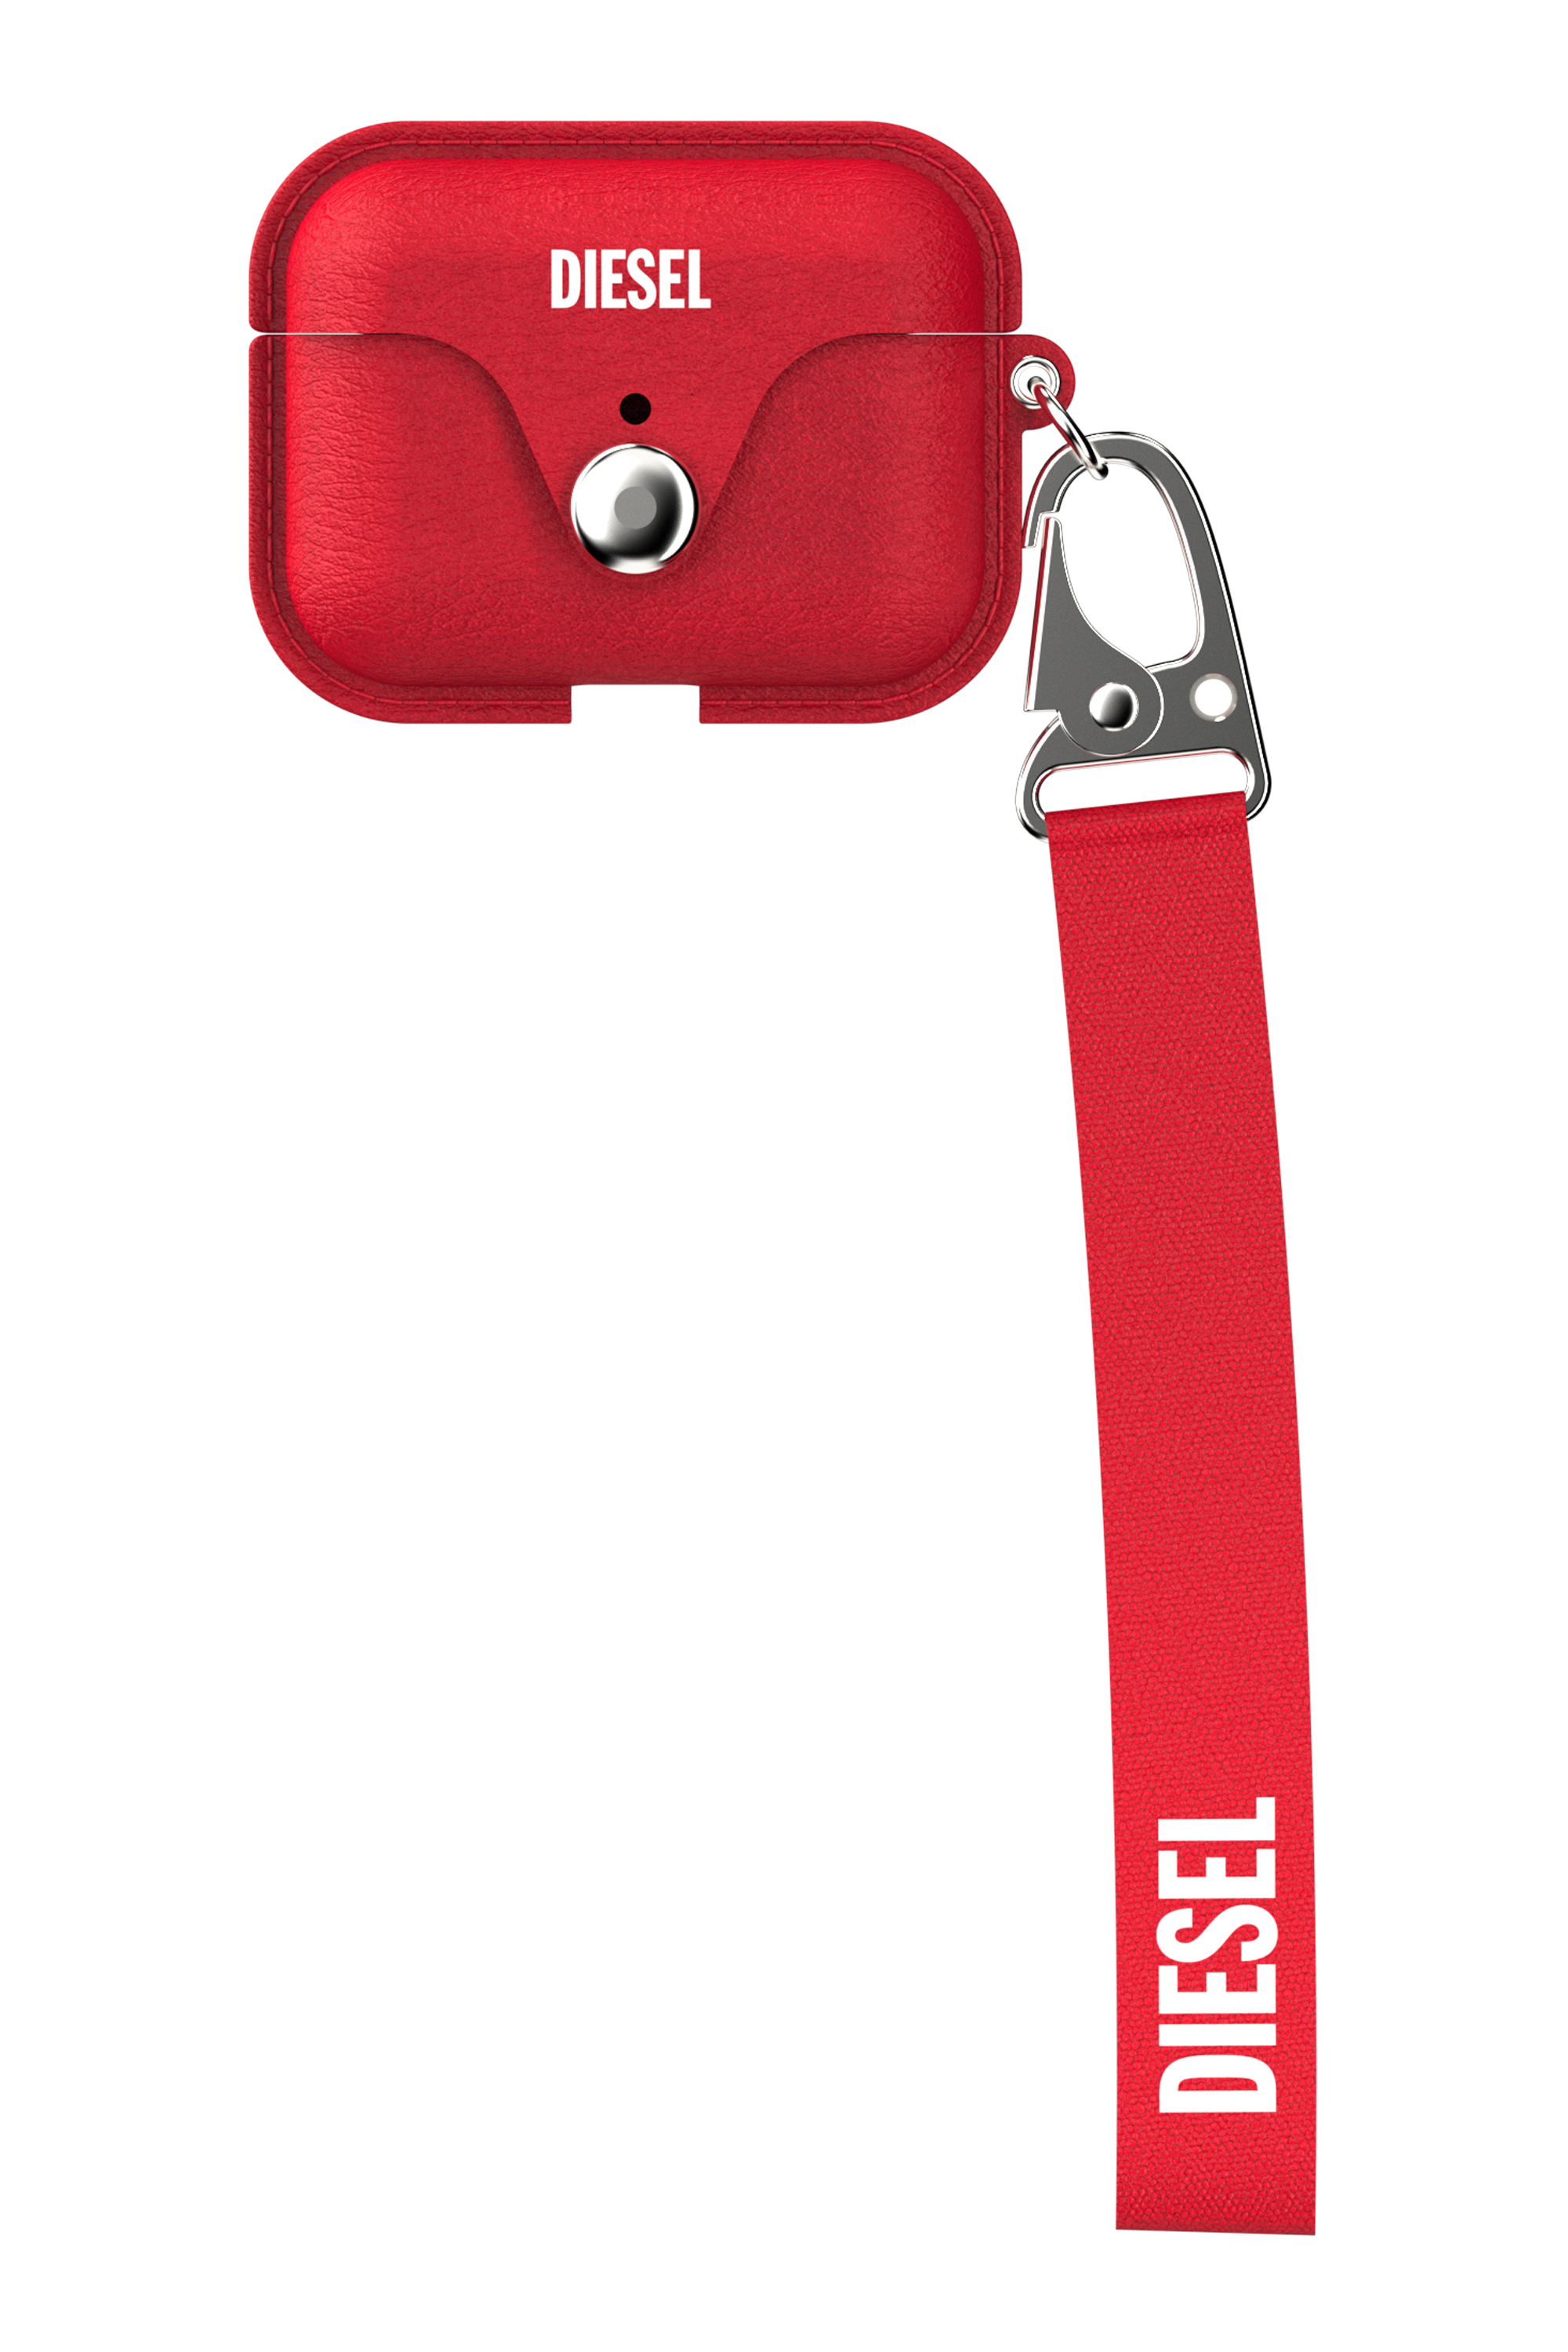 Diesel - 49860 AIRPOD CASE, Rosso - Image 3